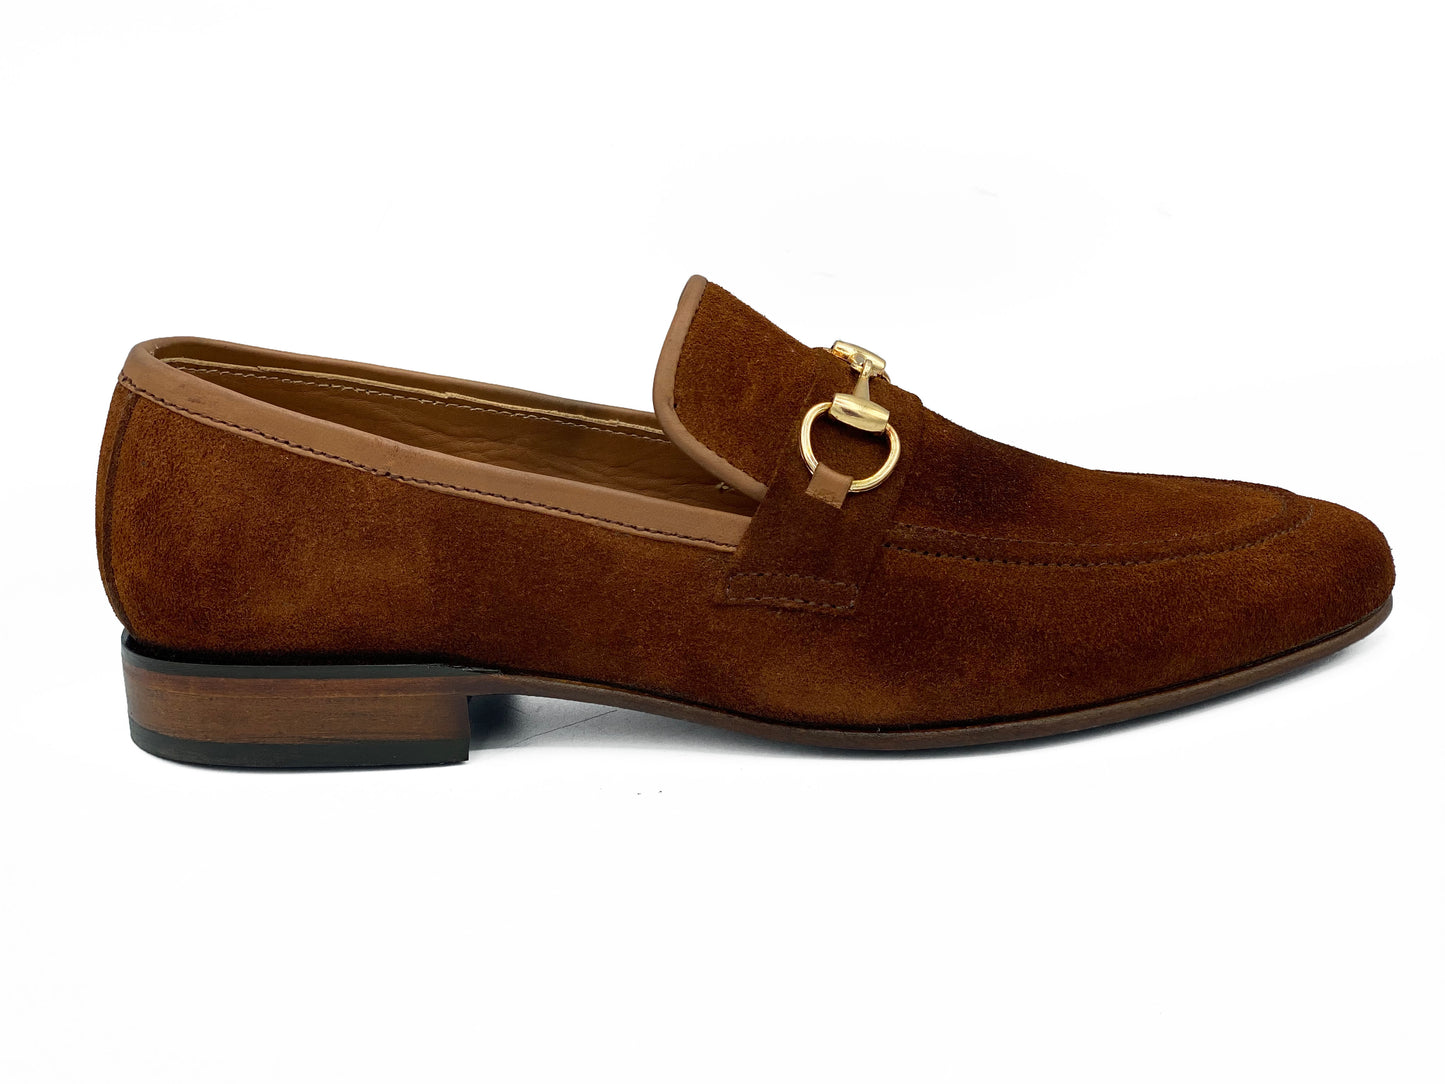 SKU:4050-Brown Suede Cow Leather Formal Loafer Style